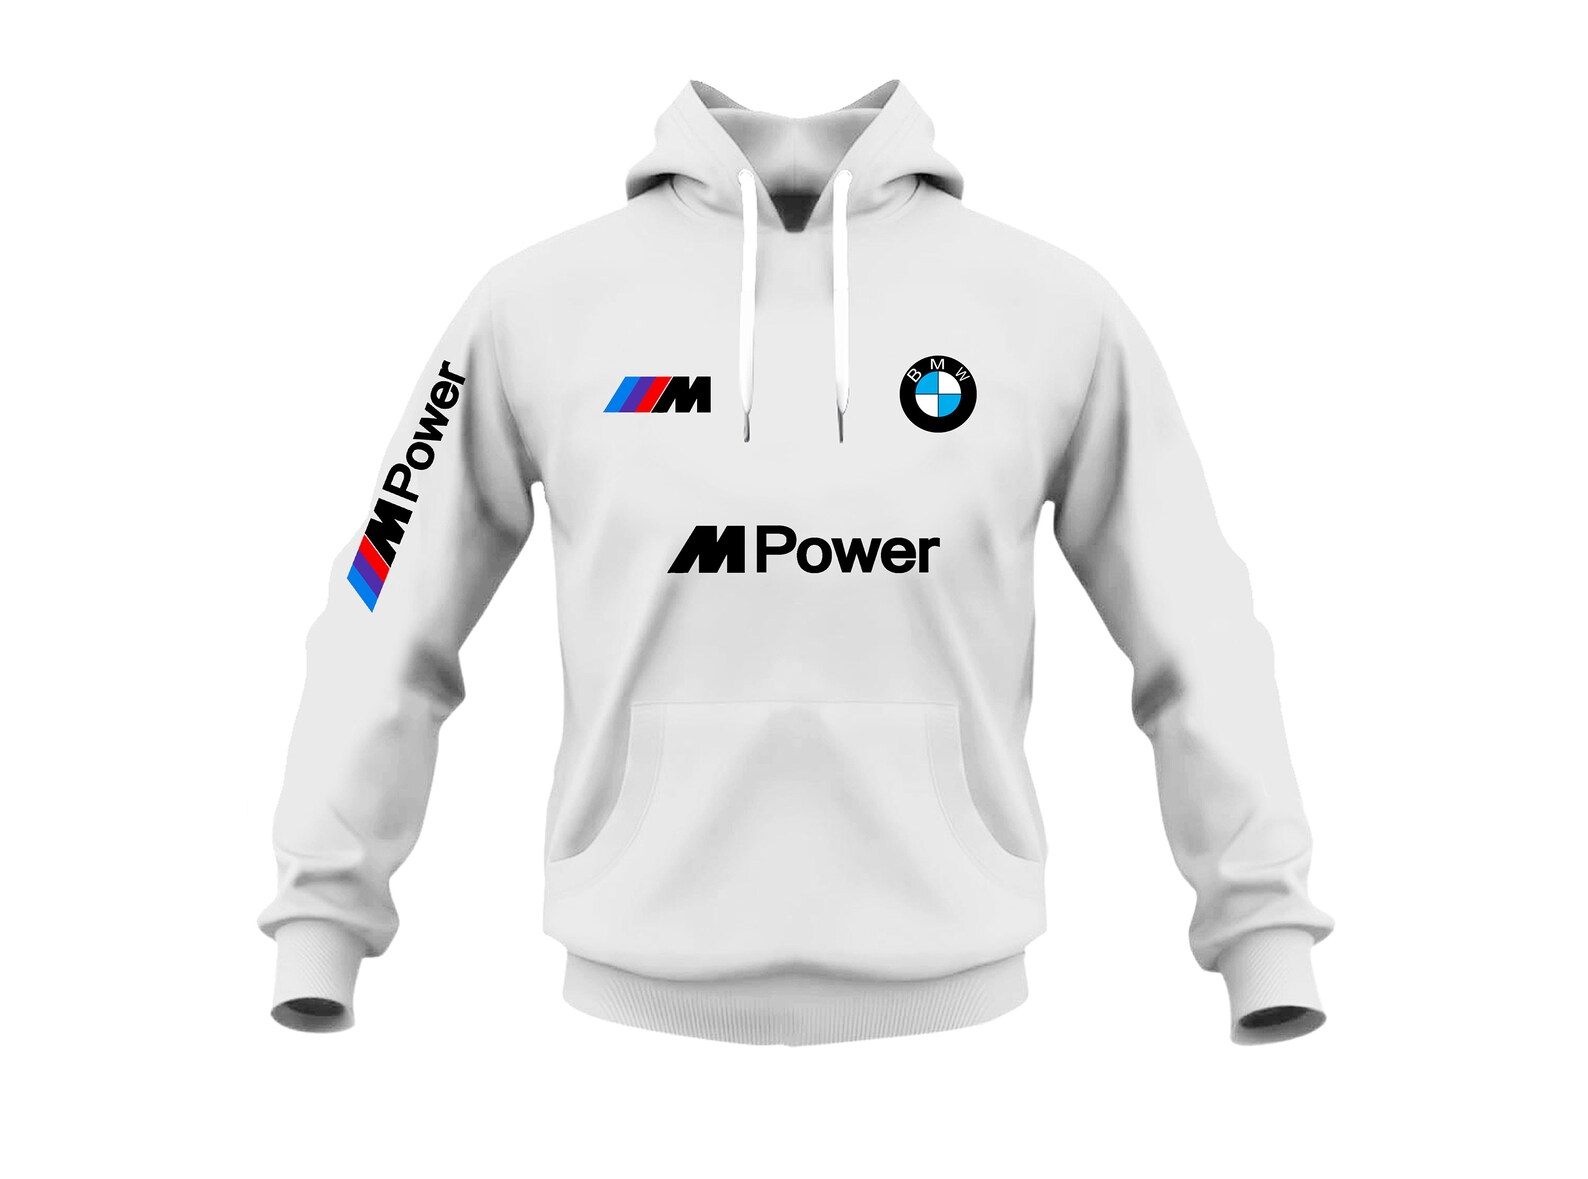 BMW Hoodies M Power Pullover Available in All Colors | Etsy